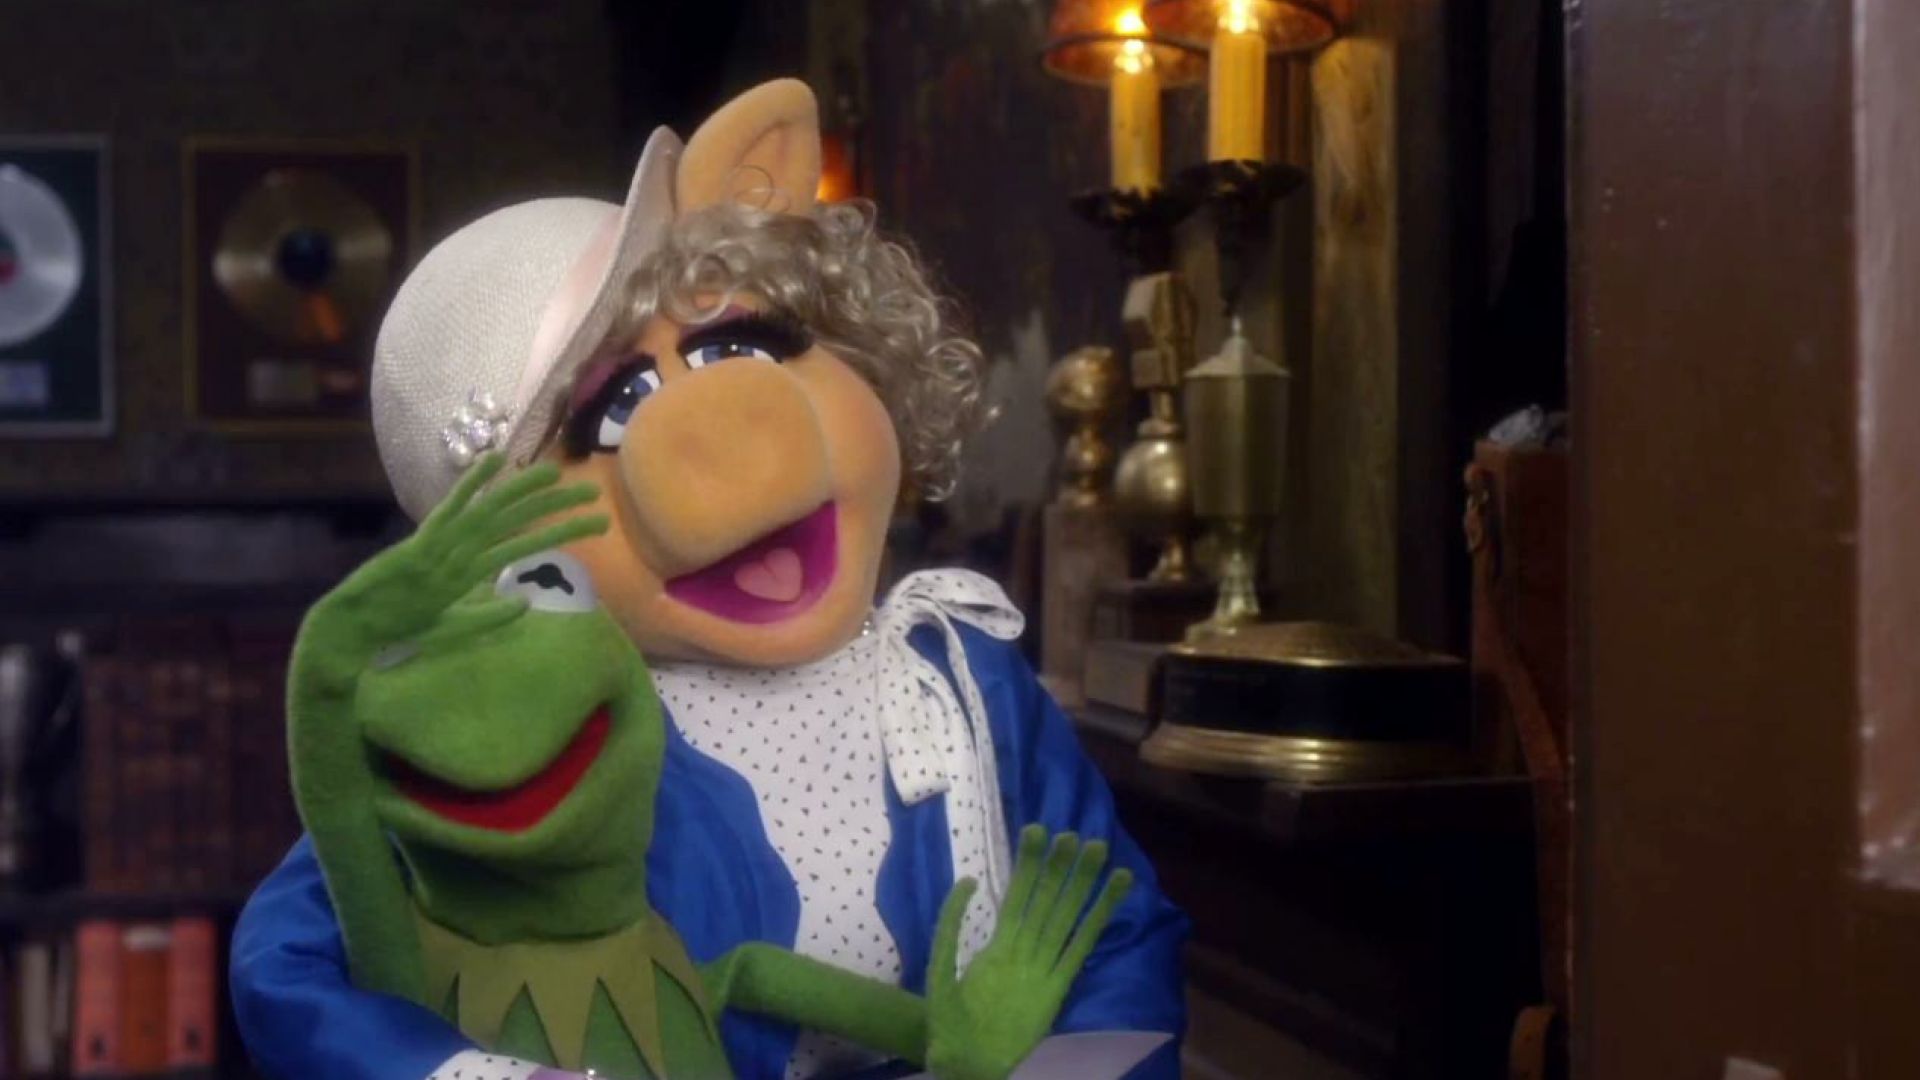 The Muppets, not in Swedish